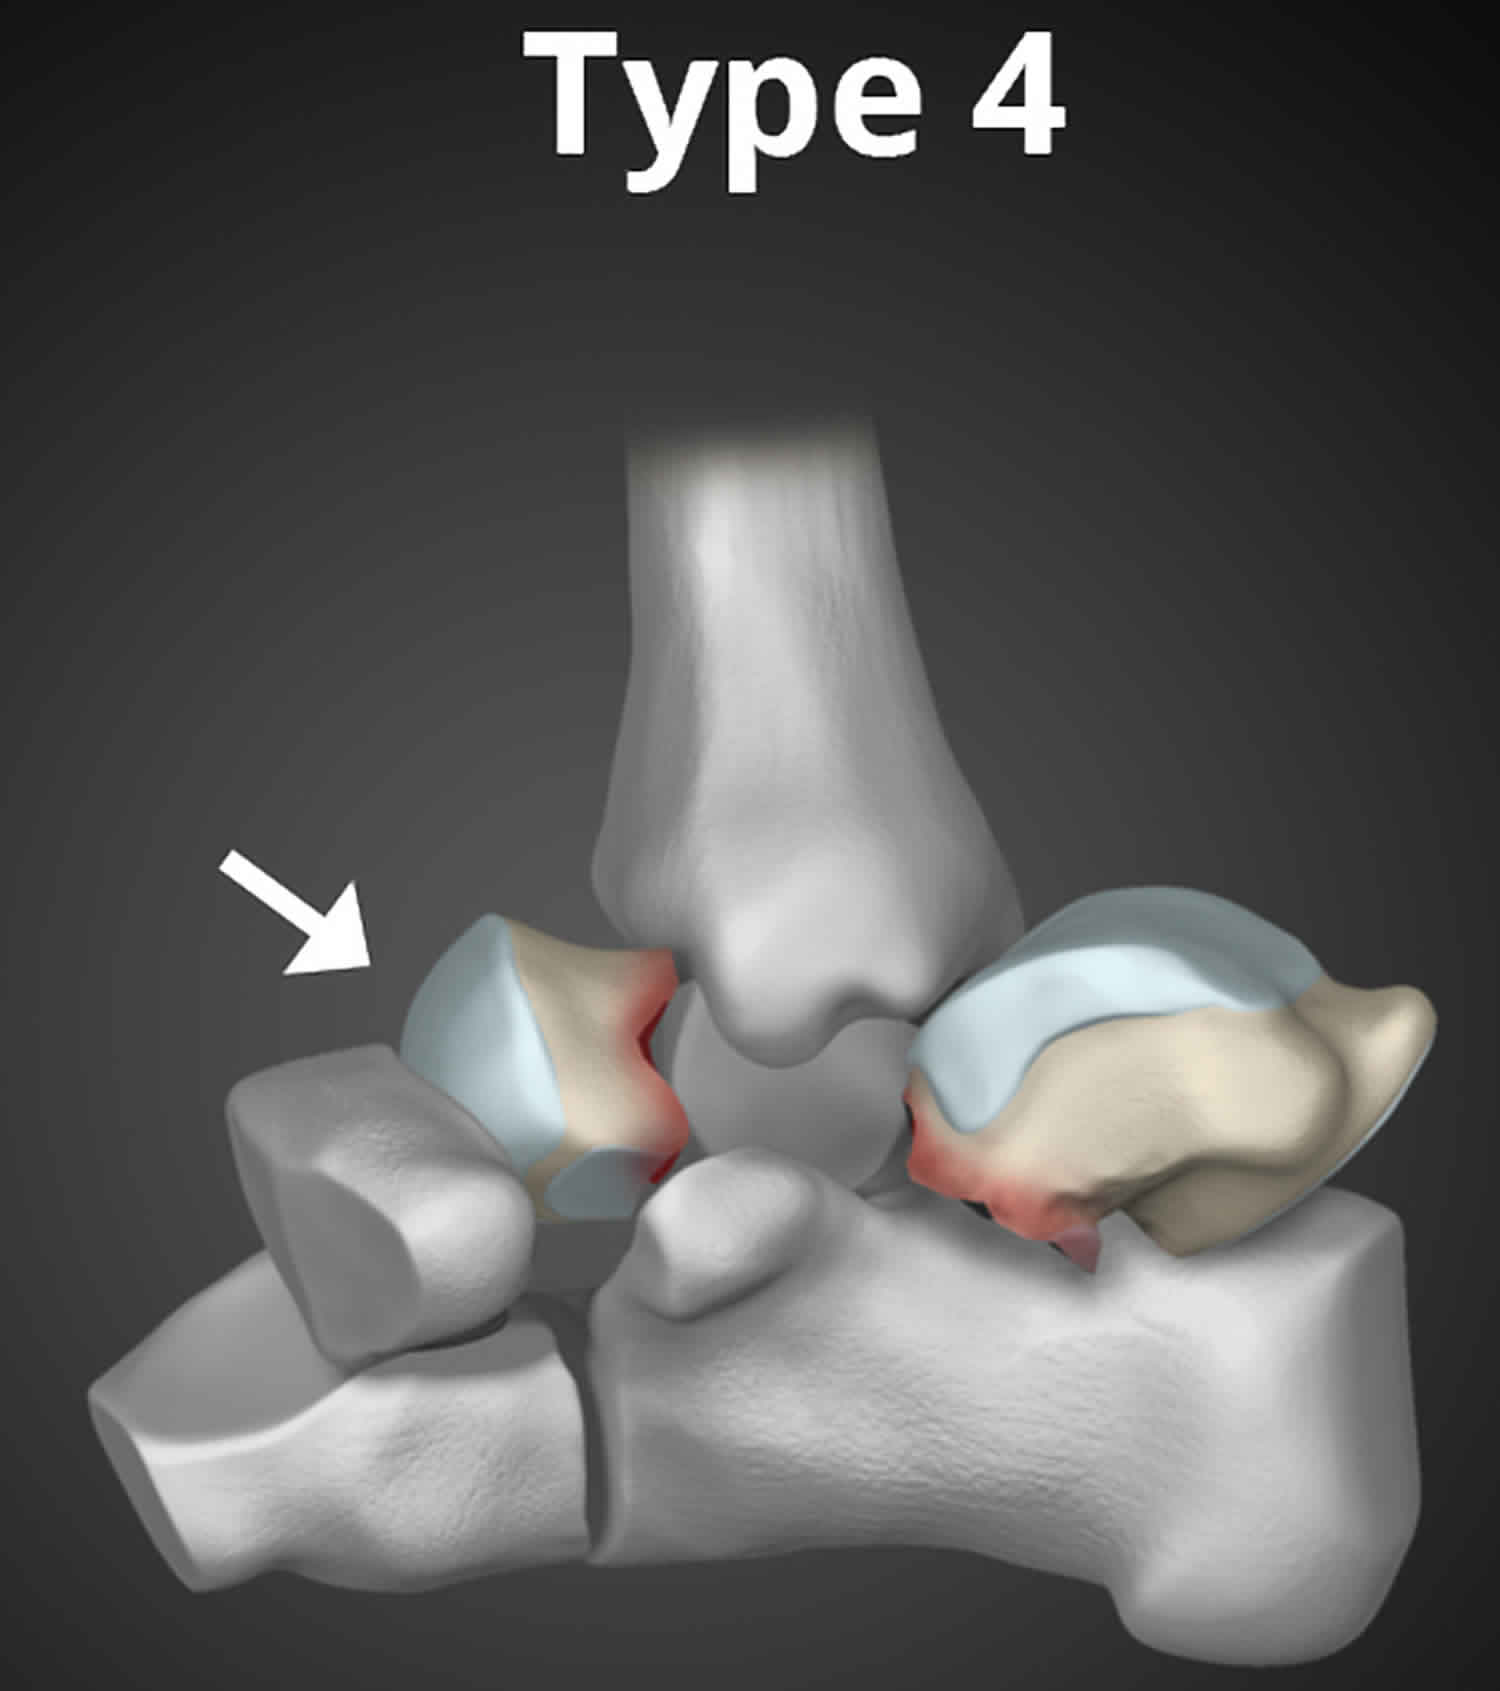 Fracture talus Talus Fracture